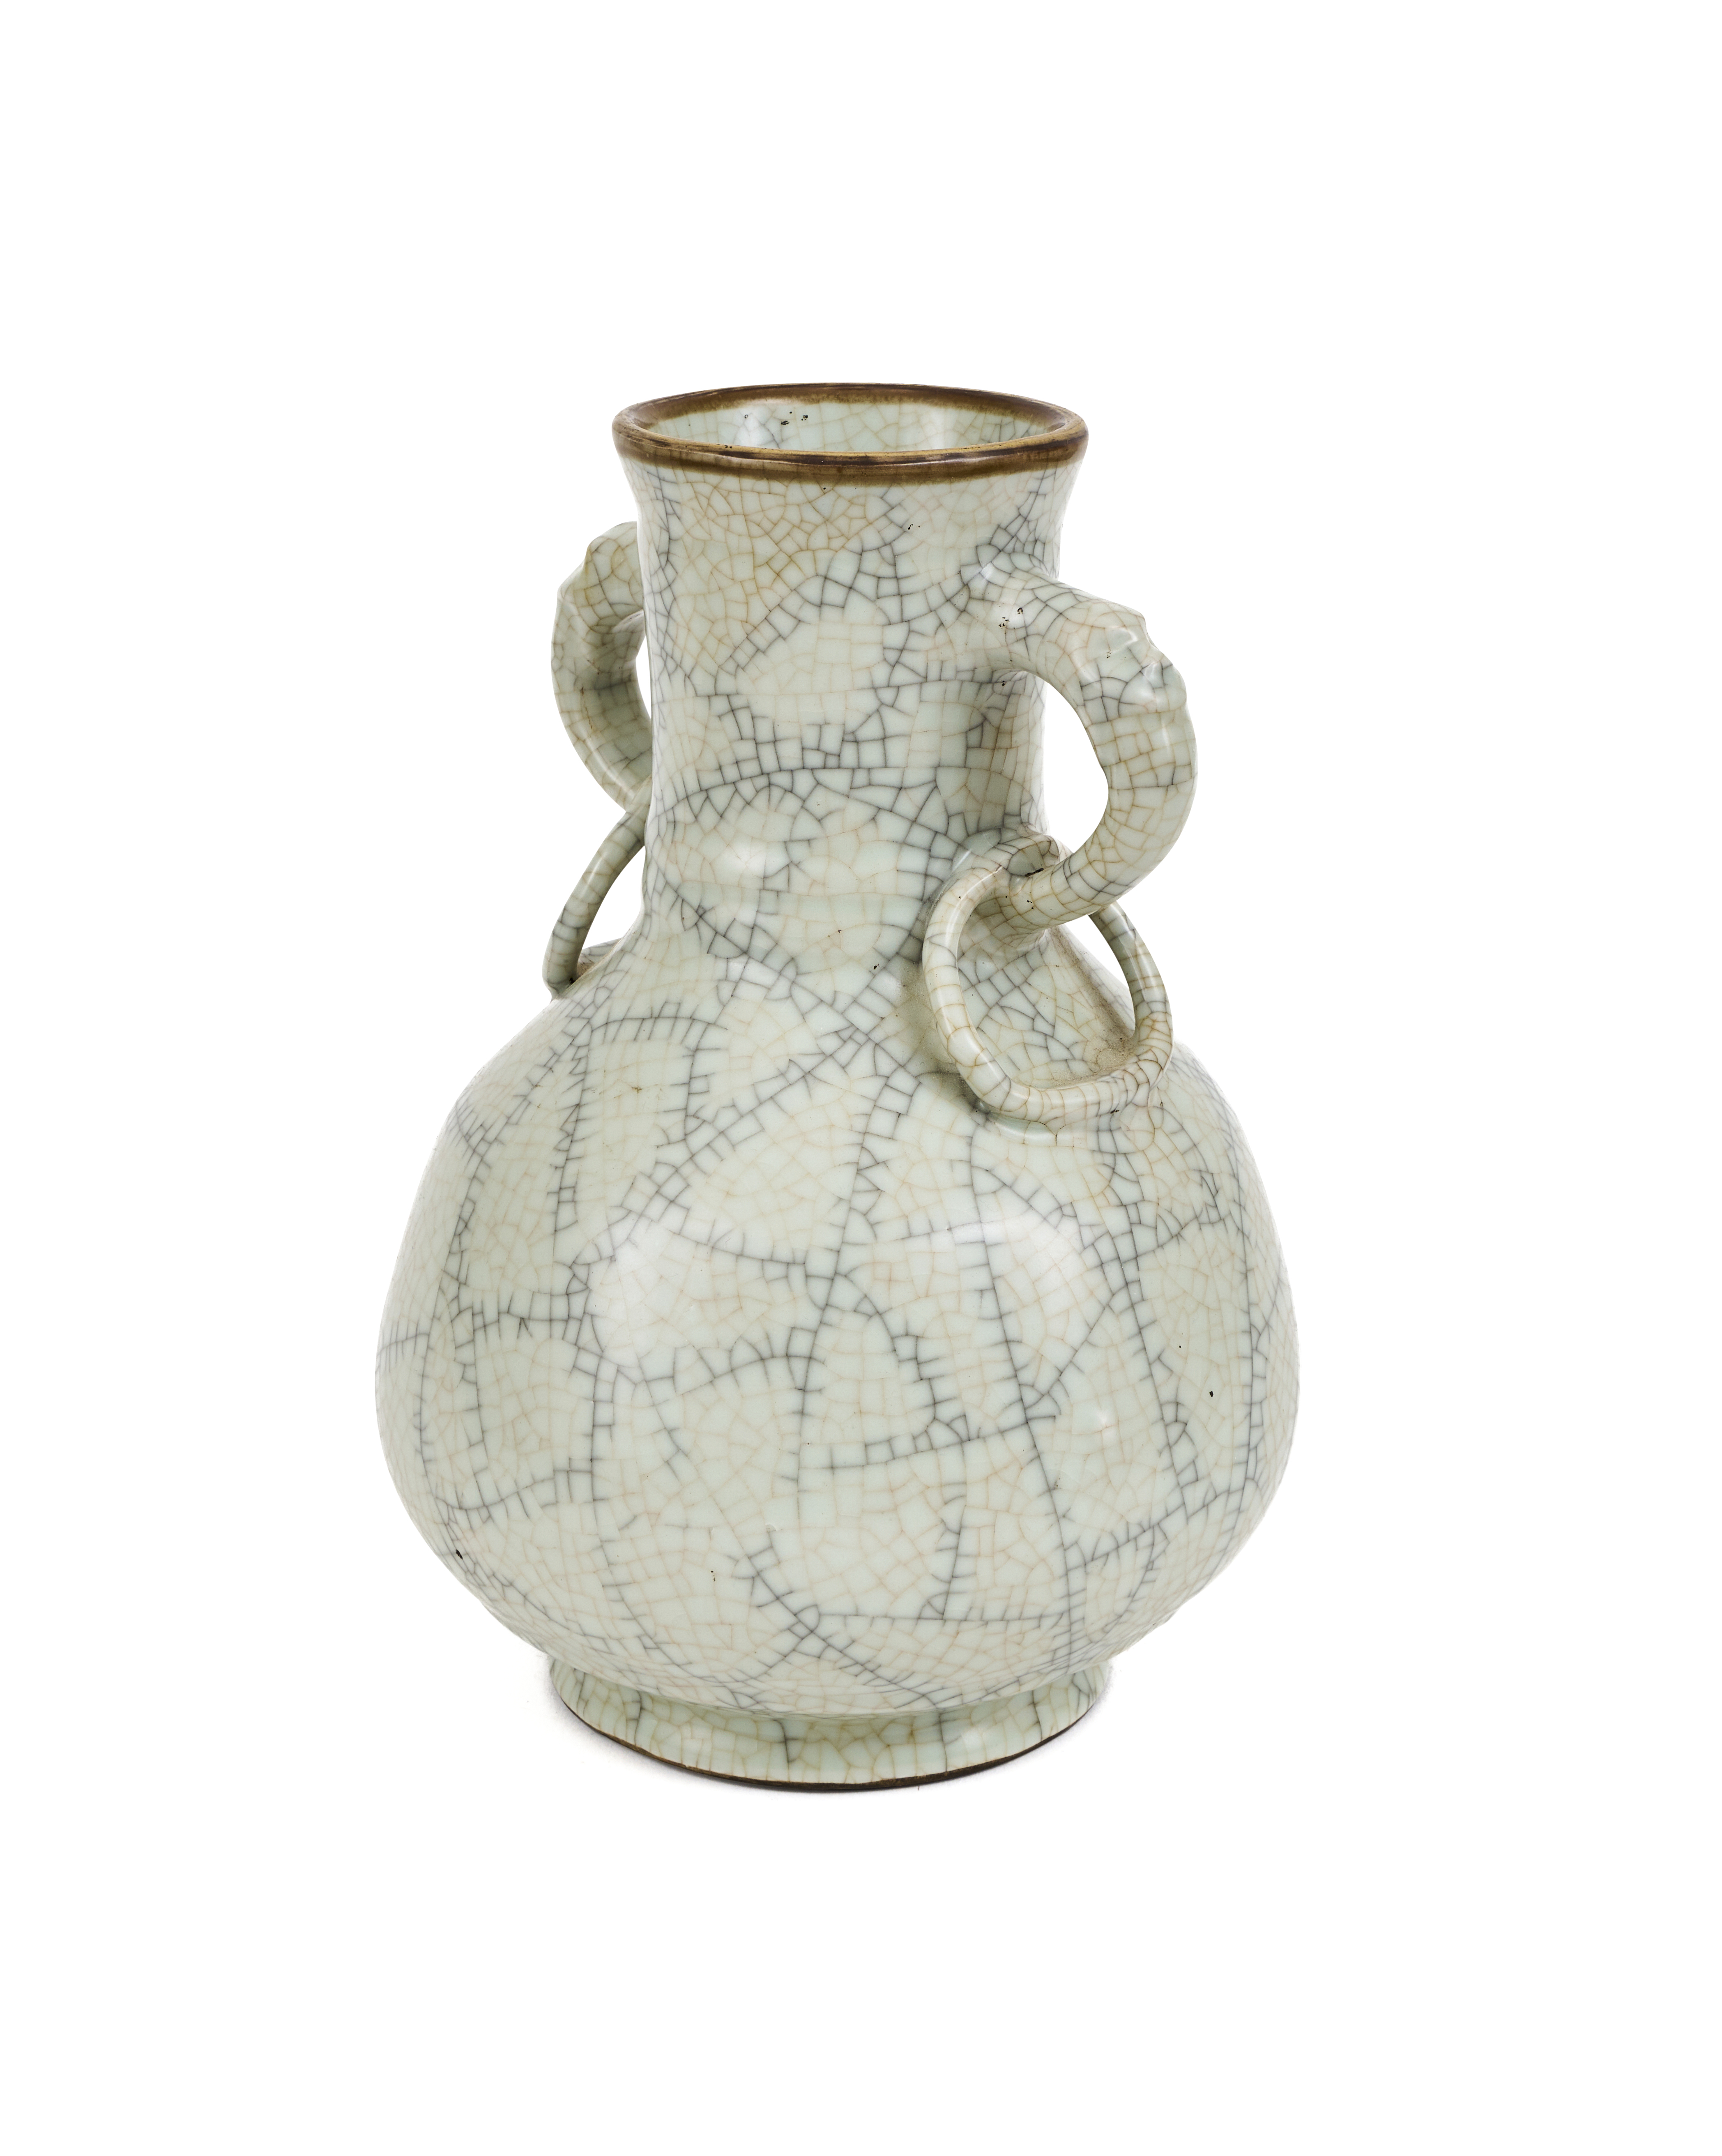 A CHINESE GE TYPE CRACKLE HU FORM VASE, QING DYNASTY (1644-1911) - Image 2 of 3